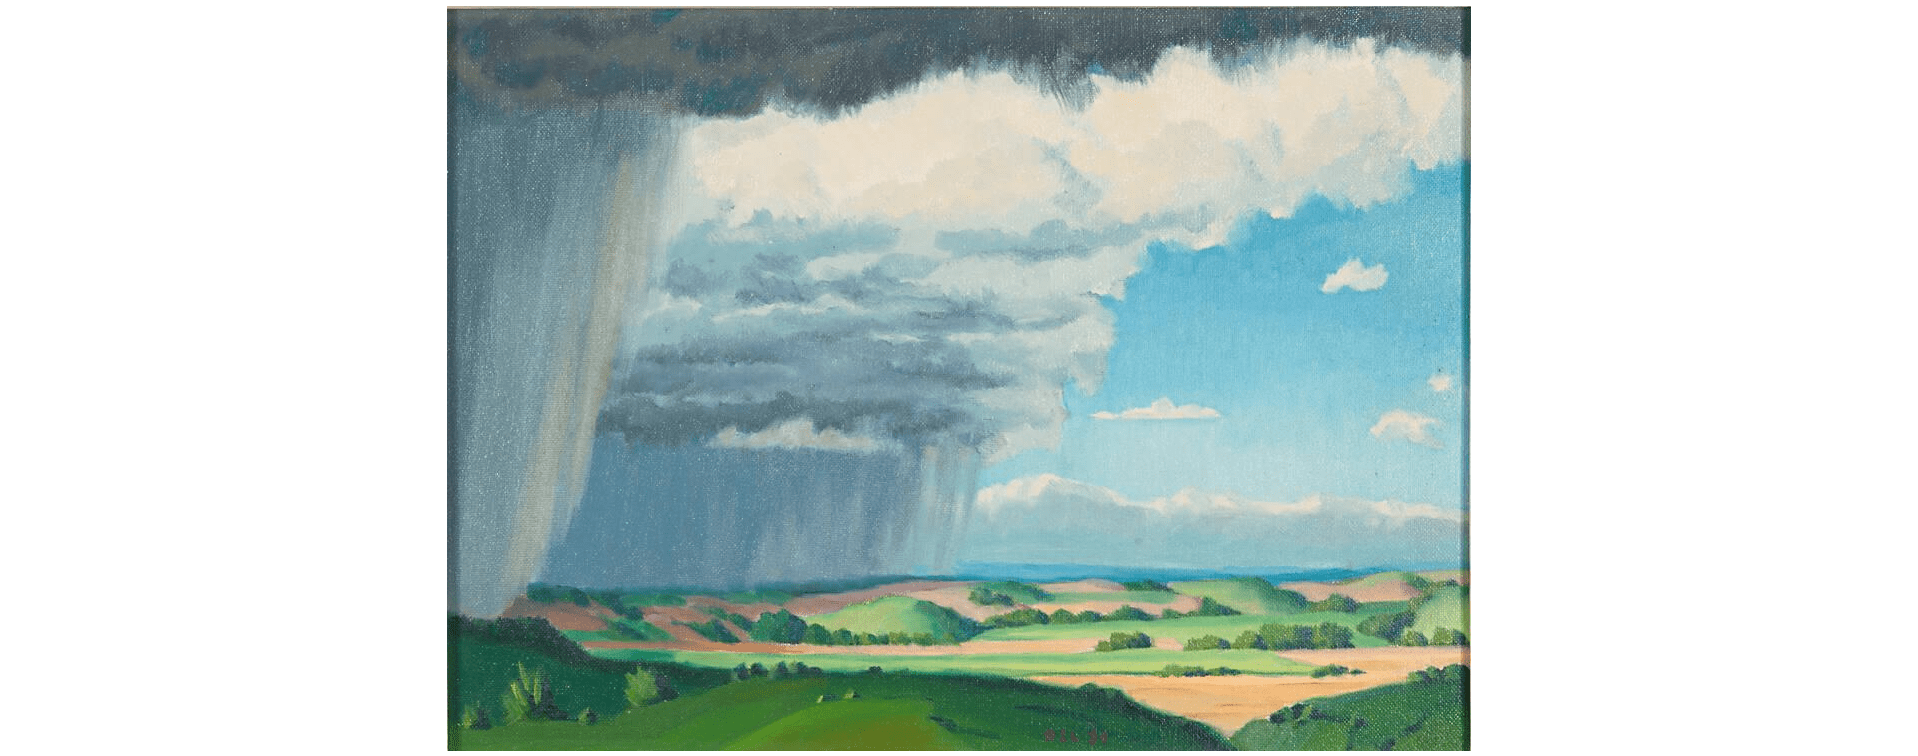 Landscape painting of storm clouds over a valley